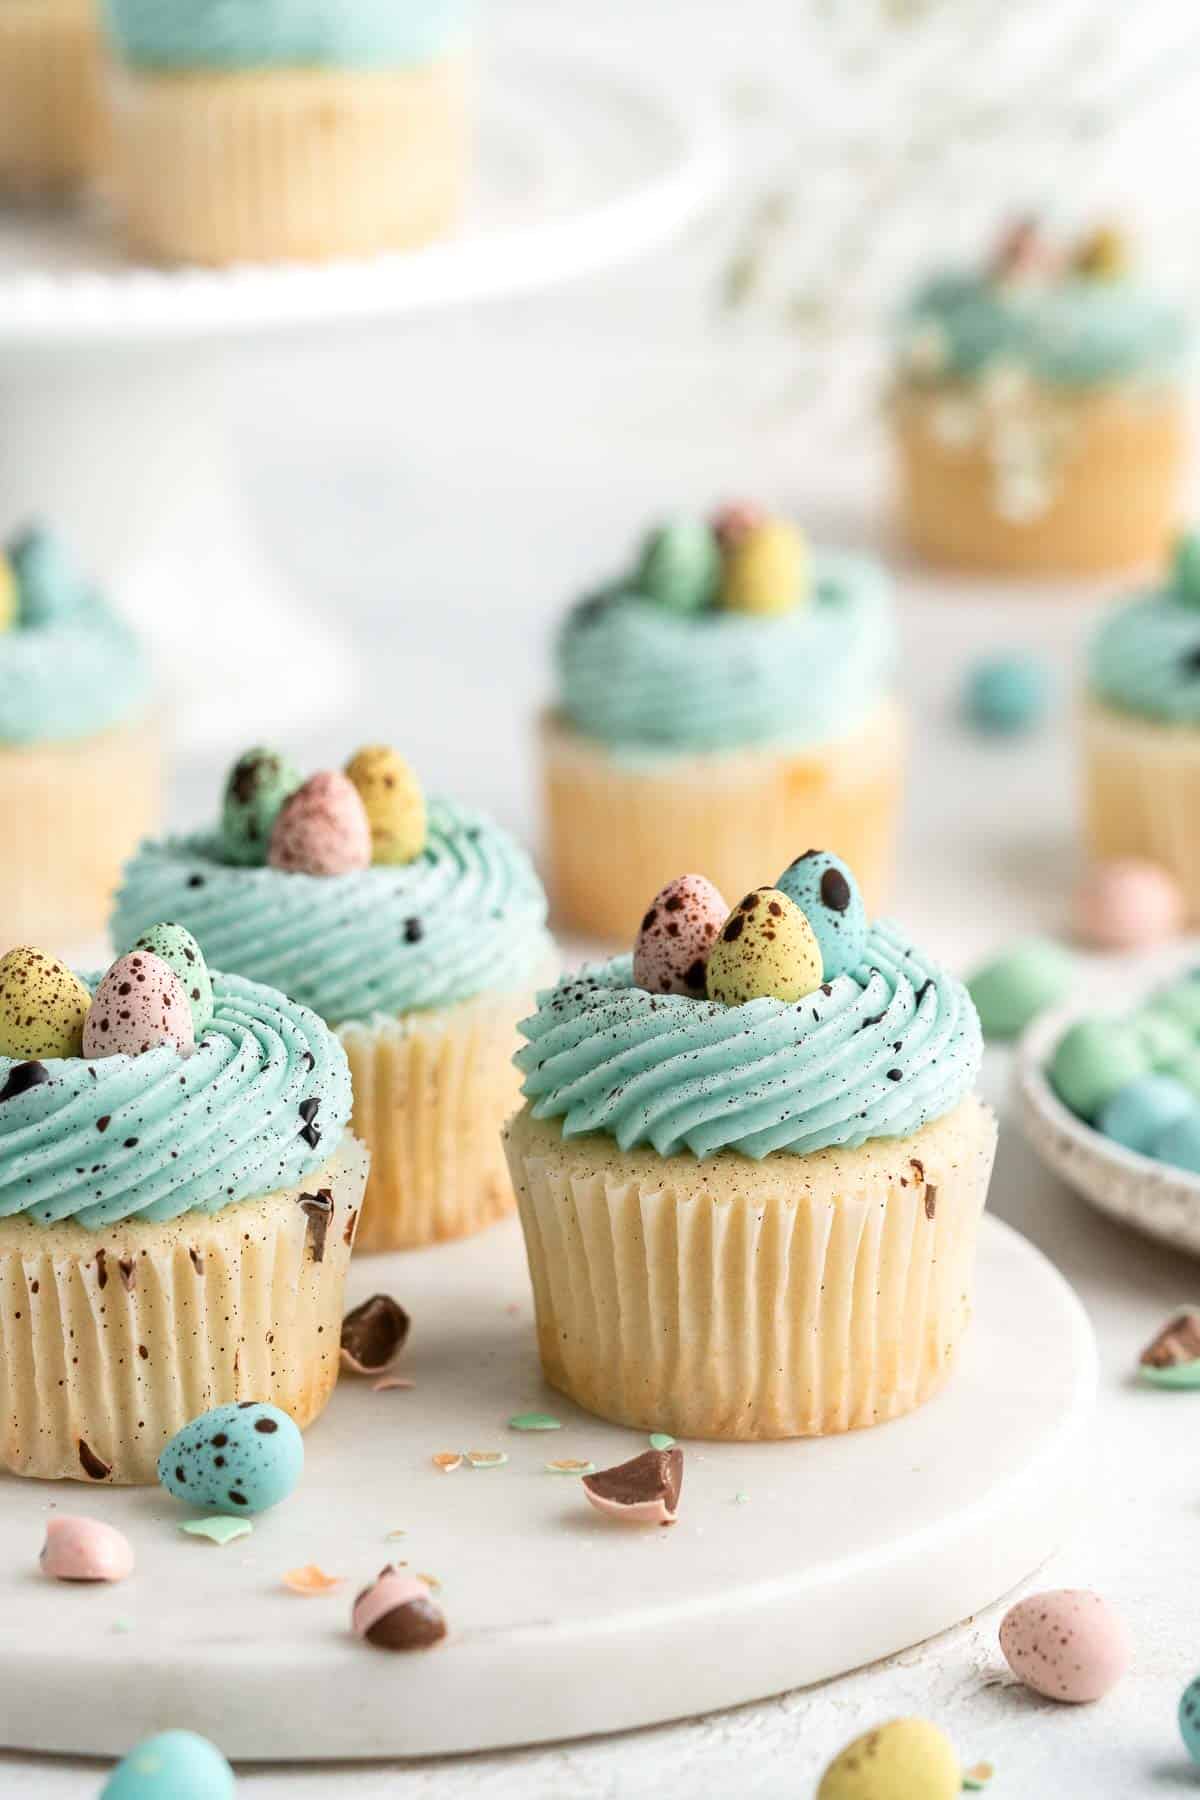 Robin’s Egg Cupcakes are an Easter treat you need to try! Fluffy vanilla cupcakes are topped with blue buttercream, mini eggs, and speckled with chocolate. | aheadofthyme.com